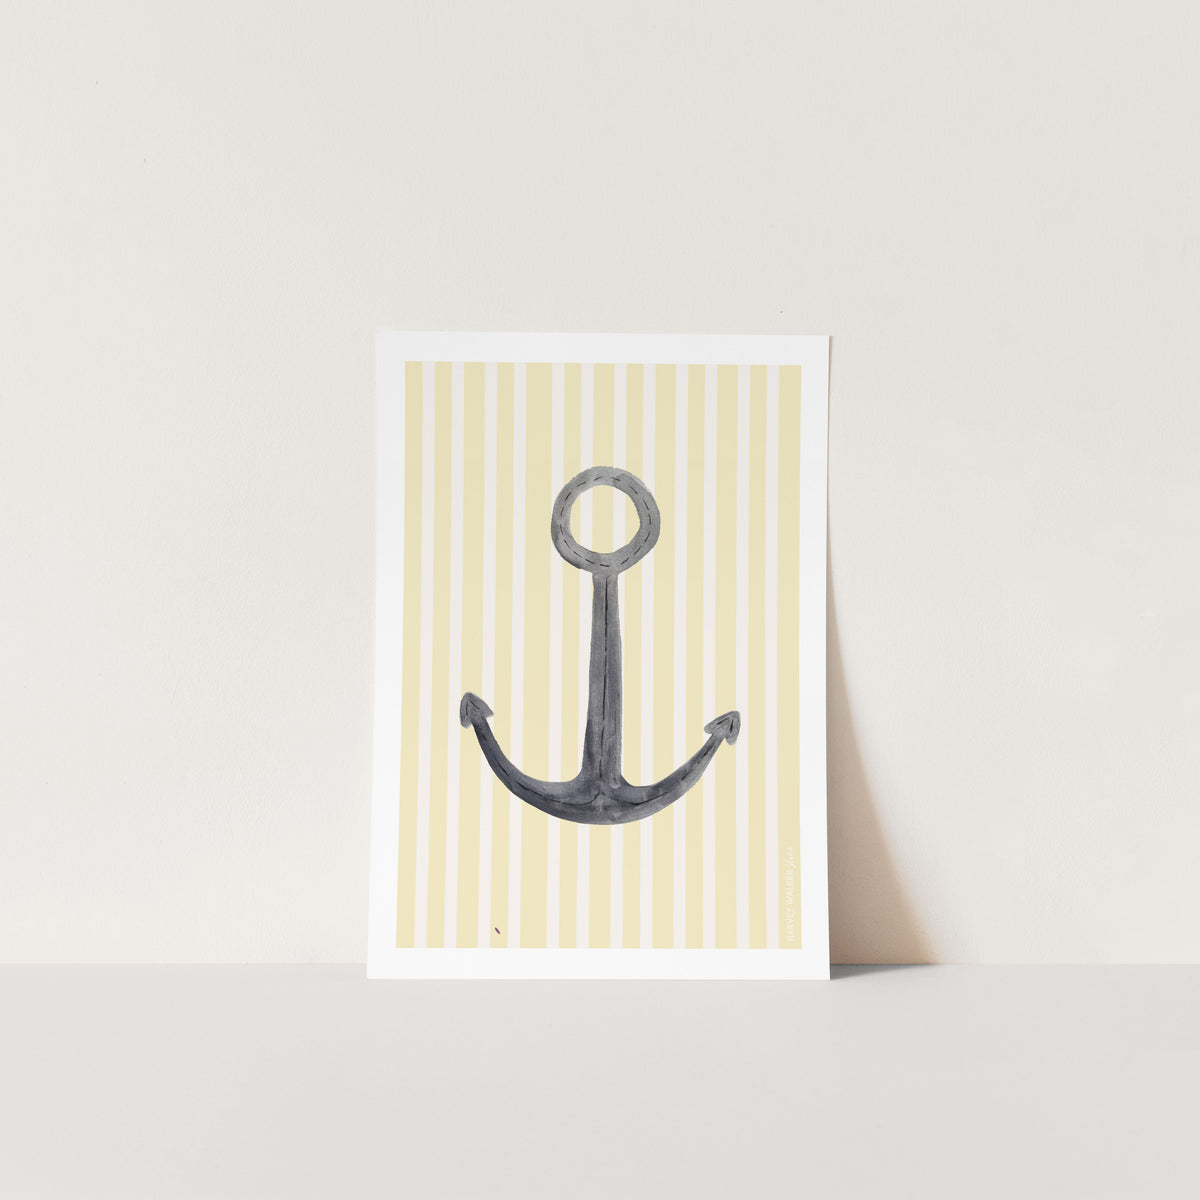 unframed fine art nautical anchor print. Printed on giclee textured cotton rag 310g, with yellow and white stripe background. classic anchor watercolour illustration.